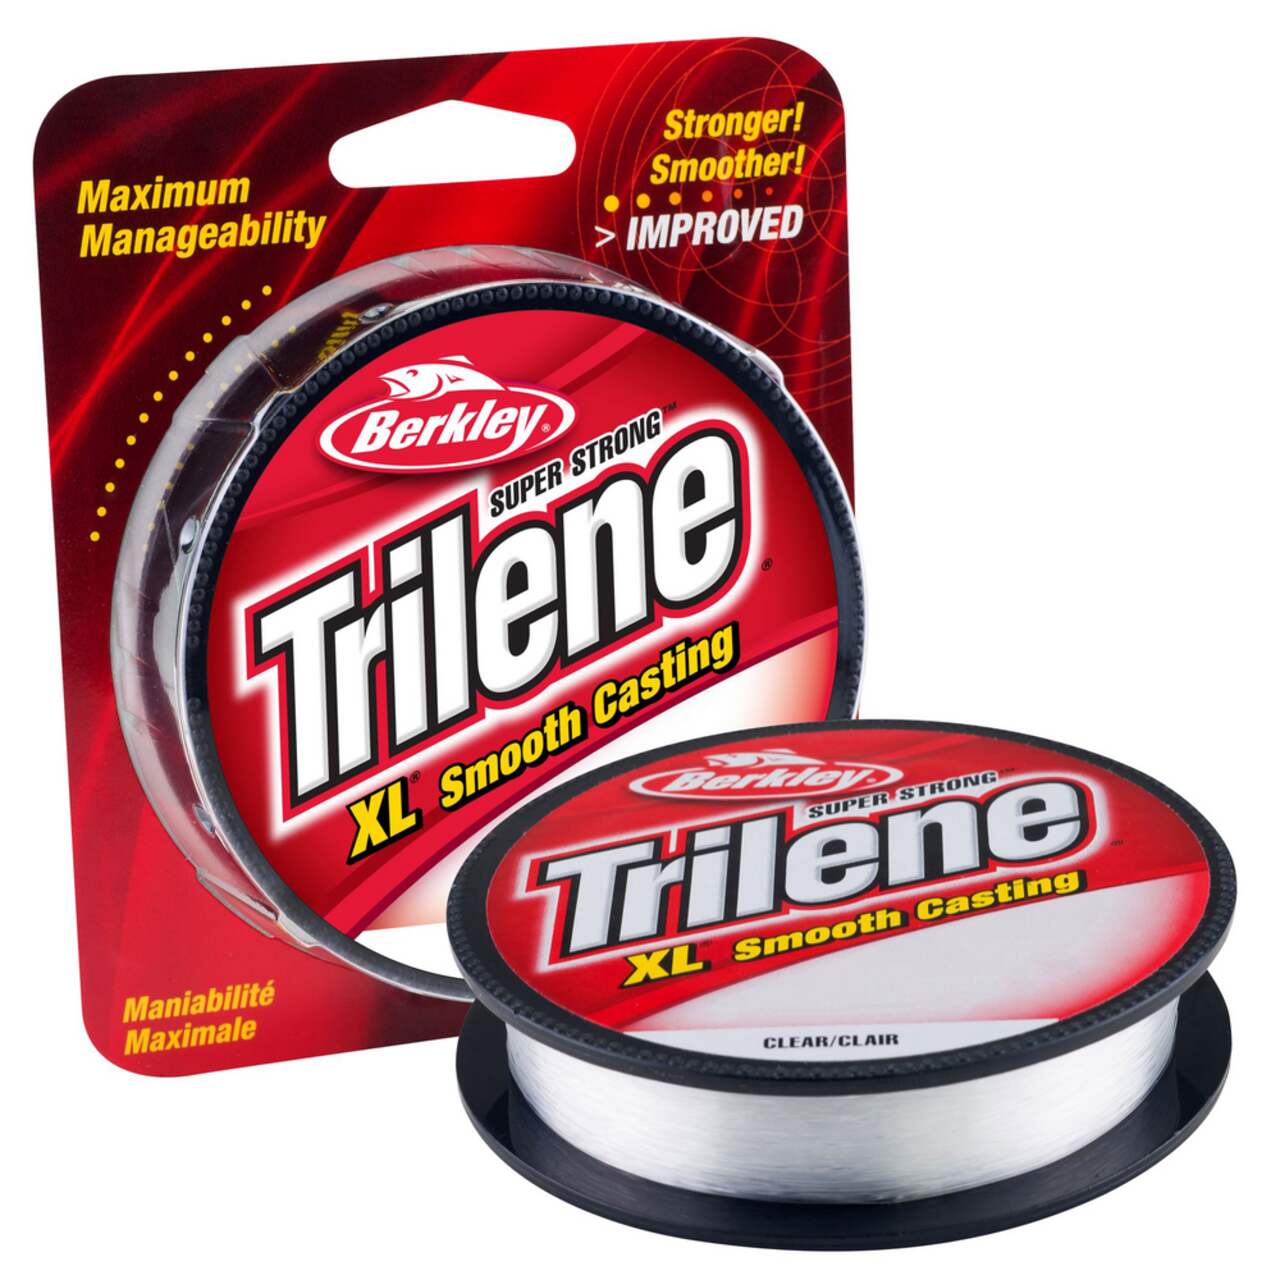 Trilene XL Smooth Casting Service Spools - Clear Fishing Line - 8 lb. Test